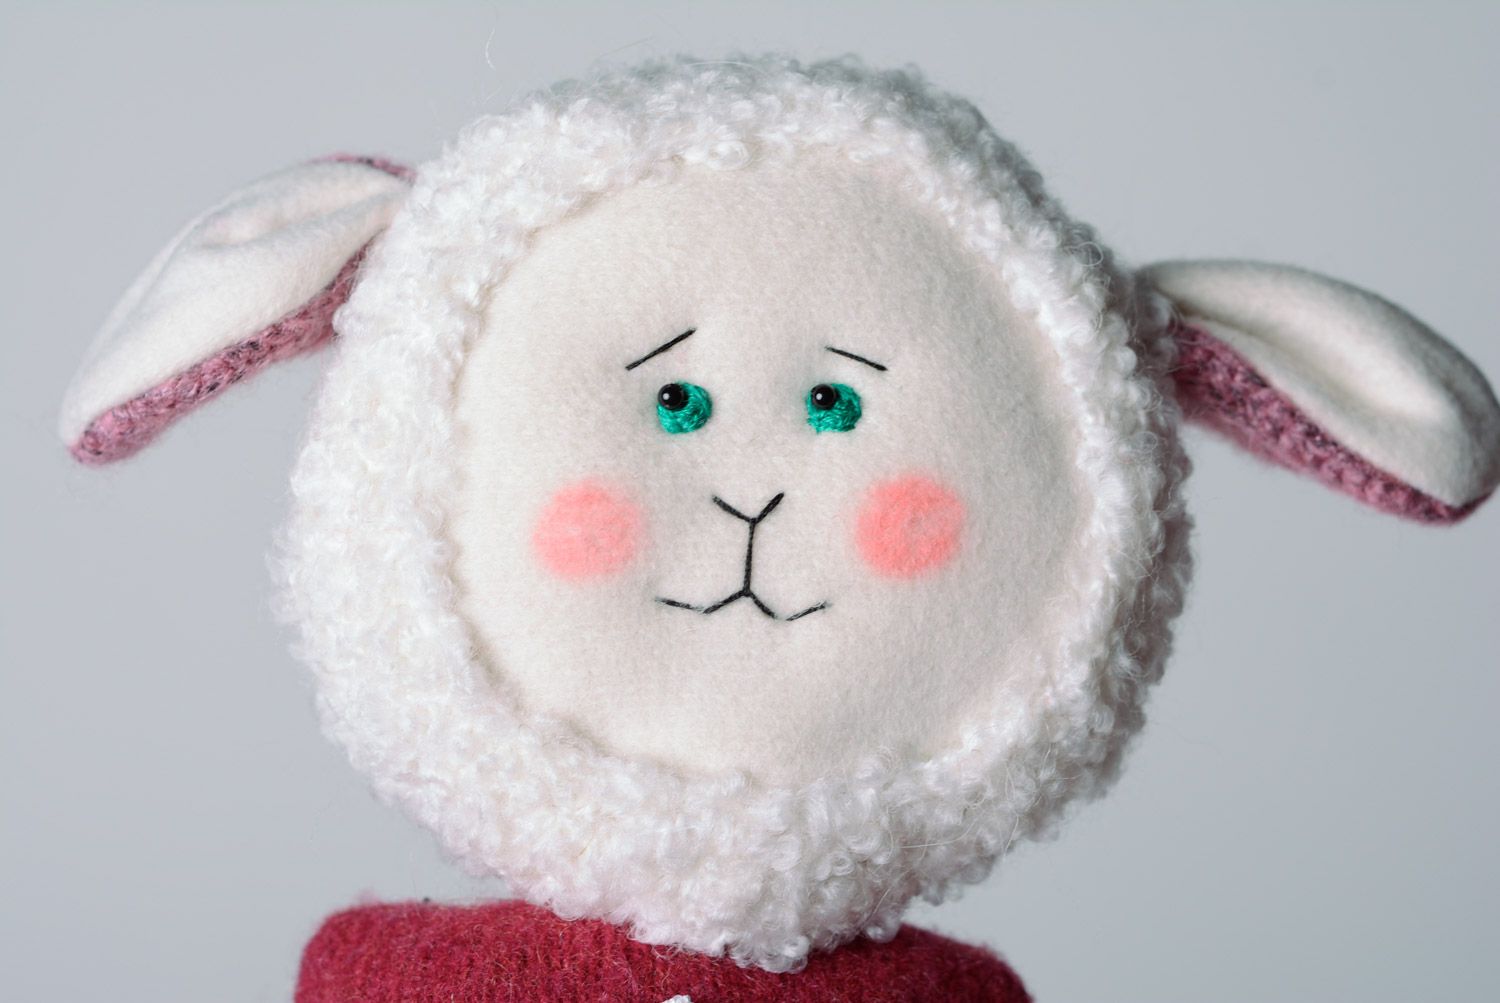 Cute handmade soft toy sewn of jersey and wool in the shape of lamb in coat photo 2